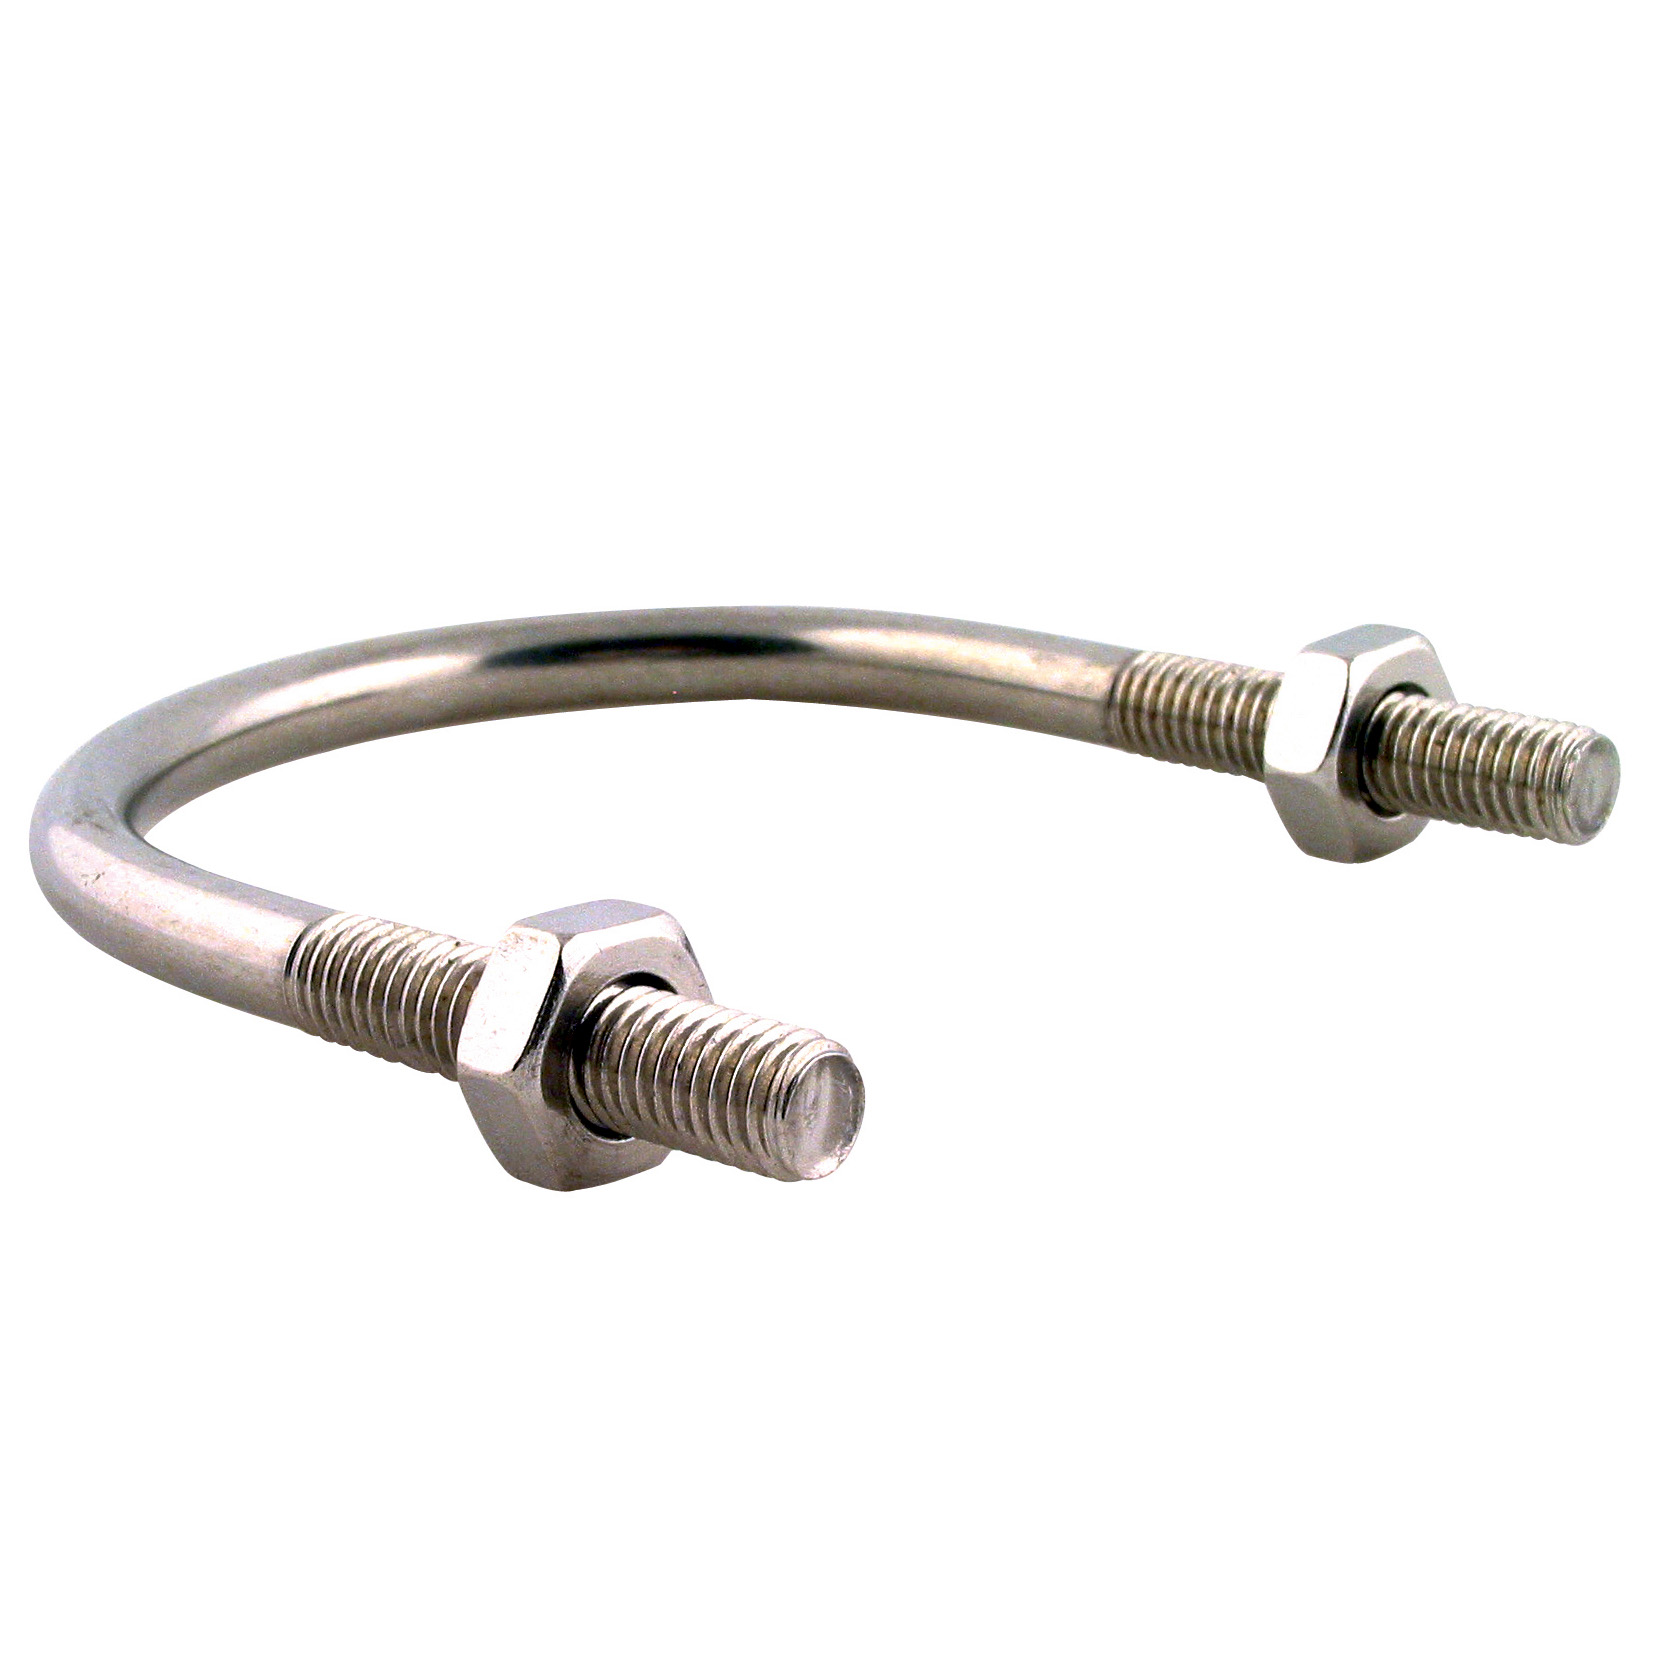 Stainless steel U bolt - Stainless steel -  - 